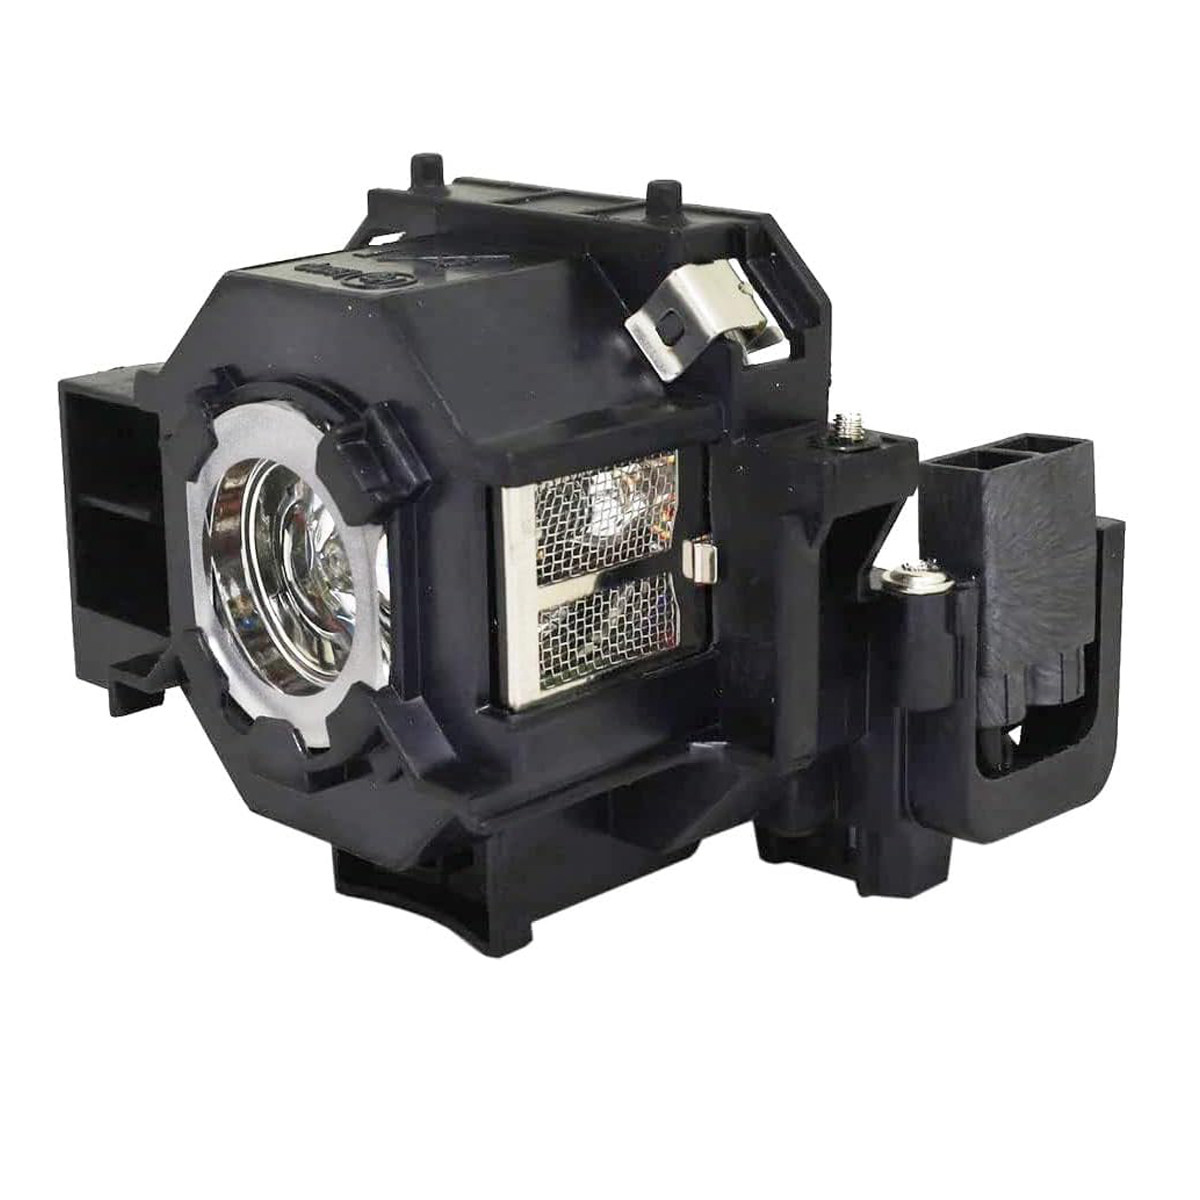 Replacement Projector lamp ELPLP41 For Epson EB-S6 EB-S62 EB-S6LU EB-TW420